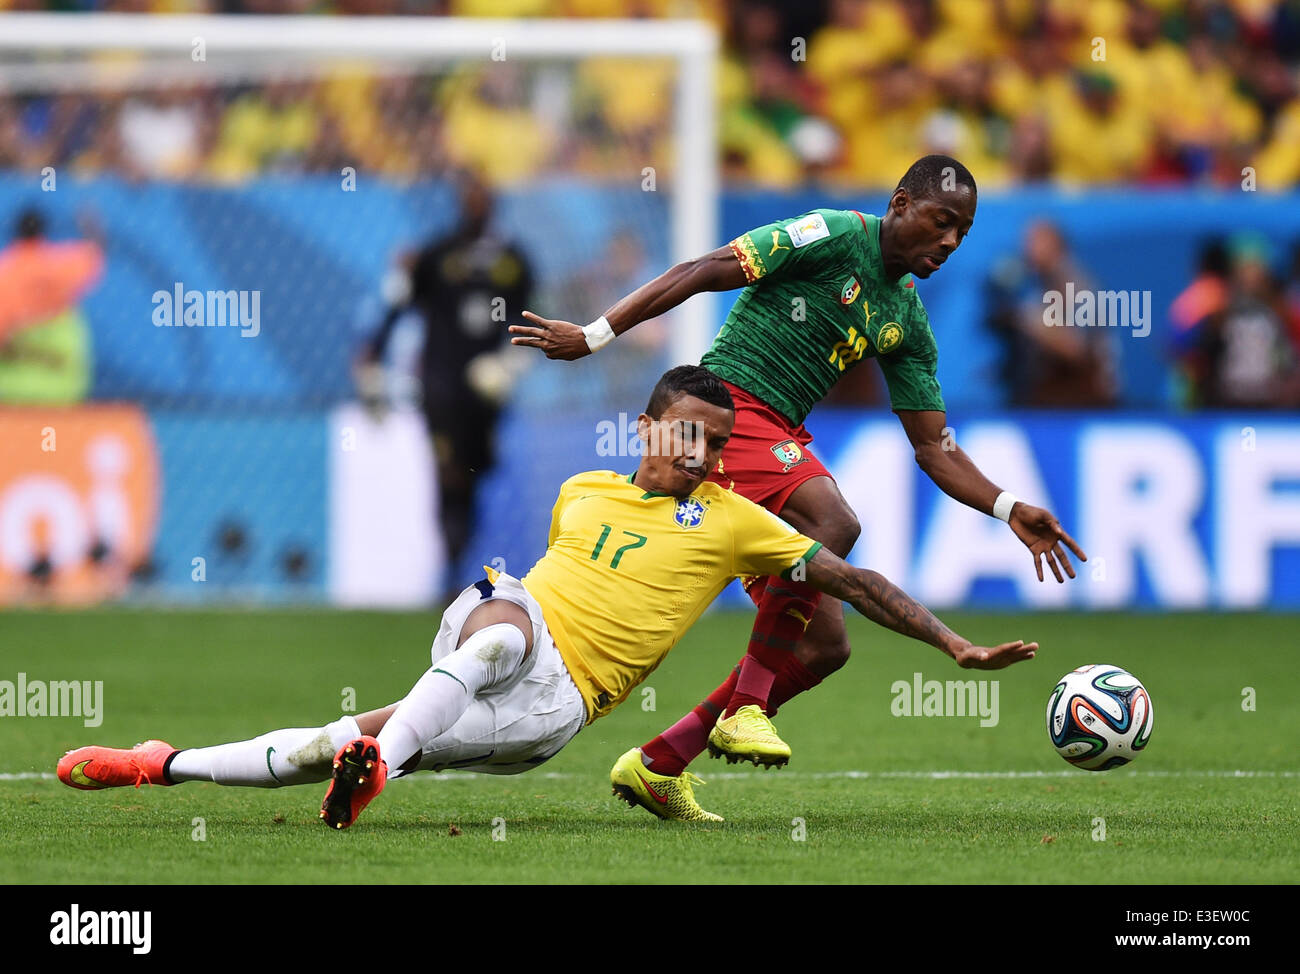 Brasilia, Brazil. 23rd June, 2014. Cameroon's Eyong Enoh (R) and Luiz Gustavo of Brazil vie for the ball during the FIFA World Cup 2014 group A preliminary round match between Cameroon and Brazil at the Estadio Nacional in Brasilia, Brazil, 23 June 2014. Photo: Marius Becker/dpa/Alamy Live News Stock Photo